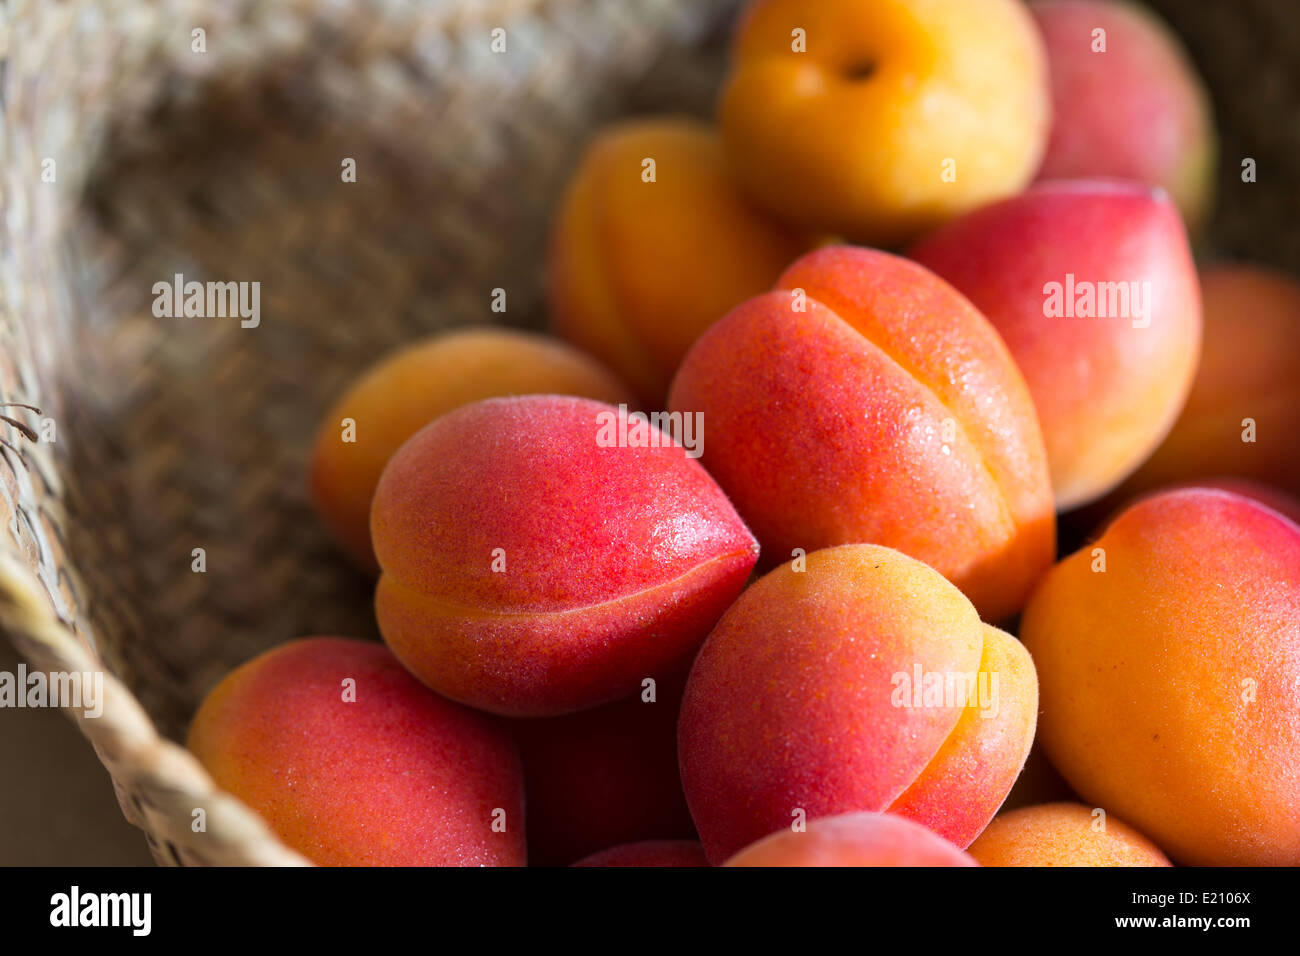 Mallorca grown two toned pink and red apricots in a woven basket Stock Photo